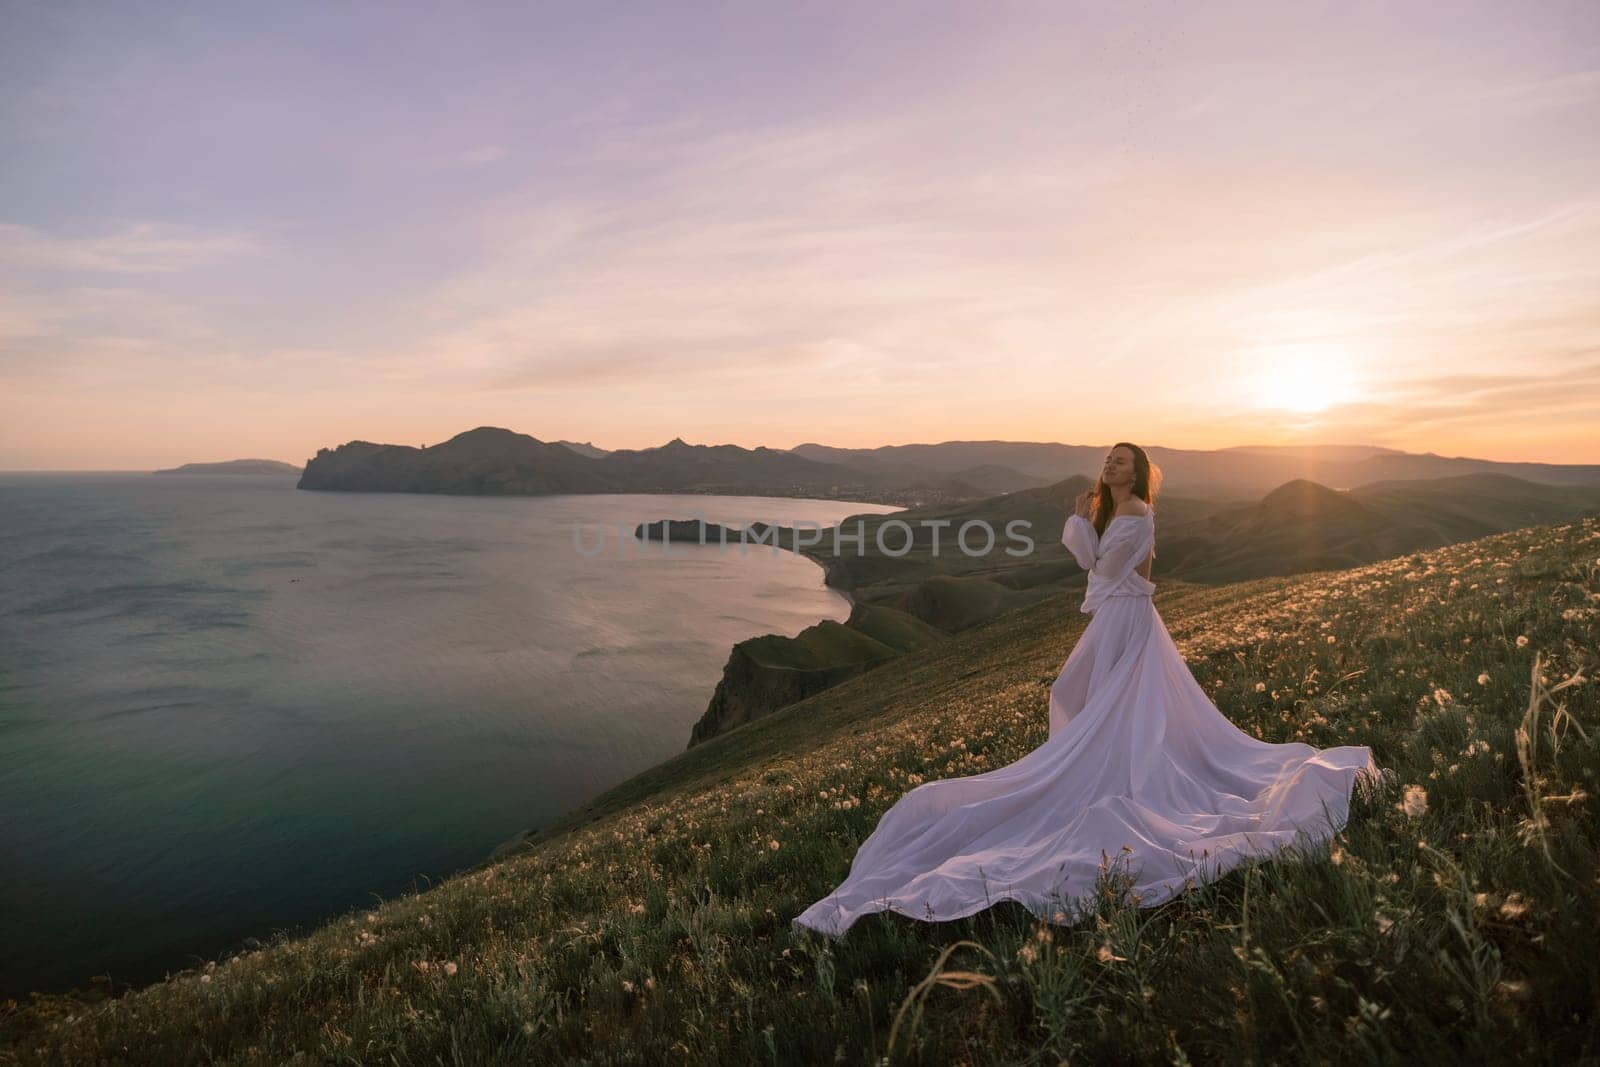 A woman in a white dress stands on a hill overlooking a body of water. The scene is serene and peaceful, with the sun setting in the background. The woman is lost in thought